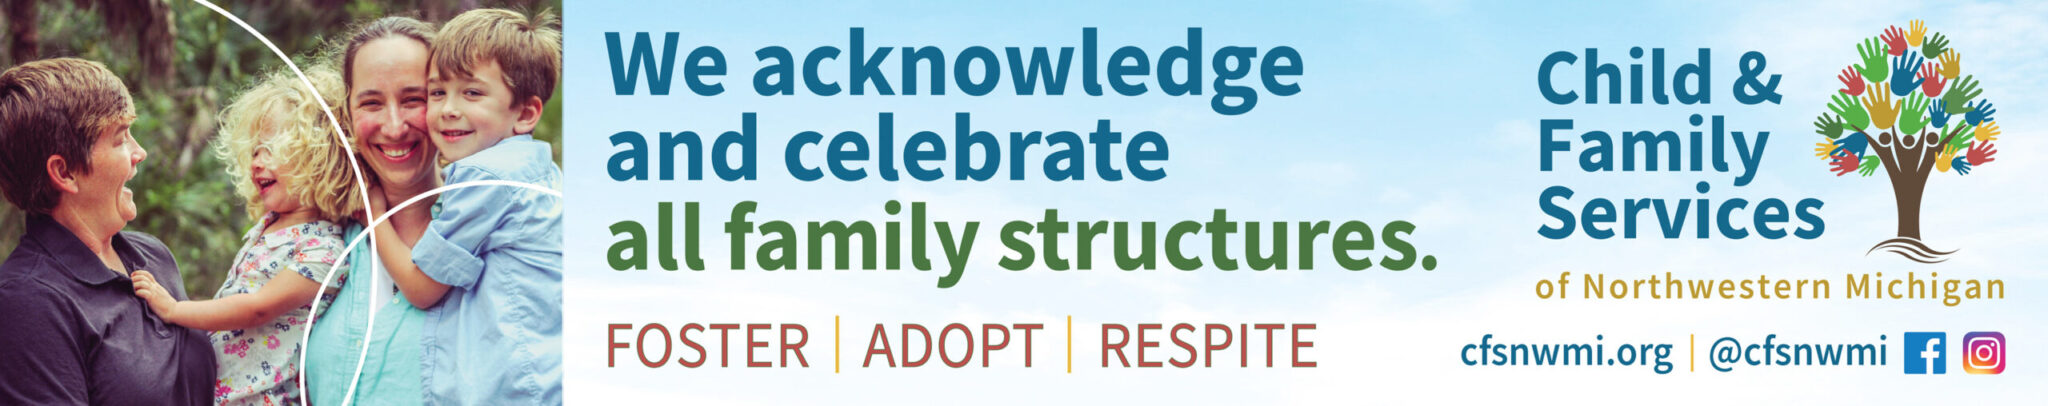 Child & Family Services of NW Michigan